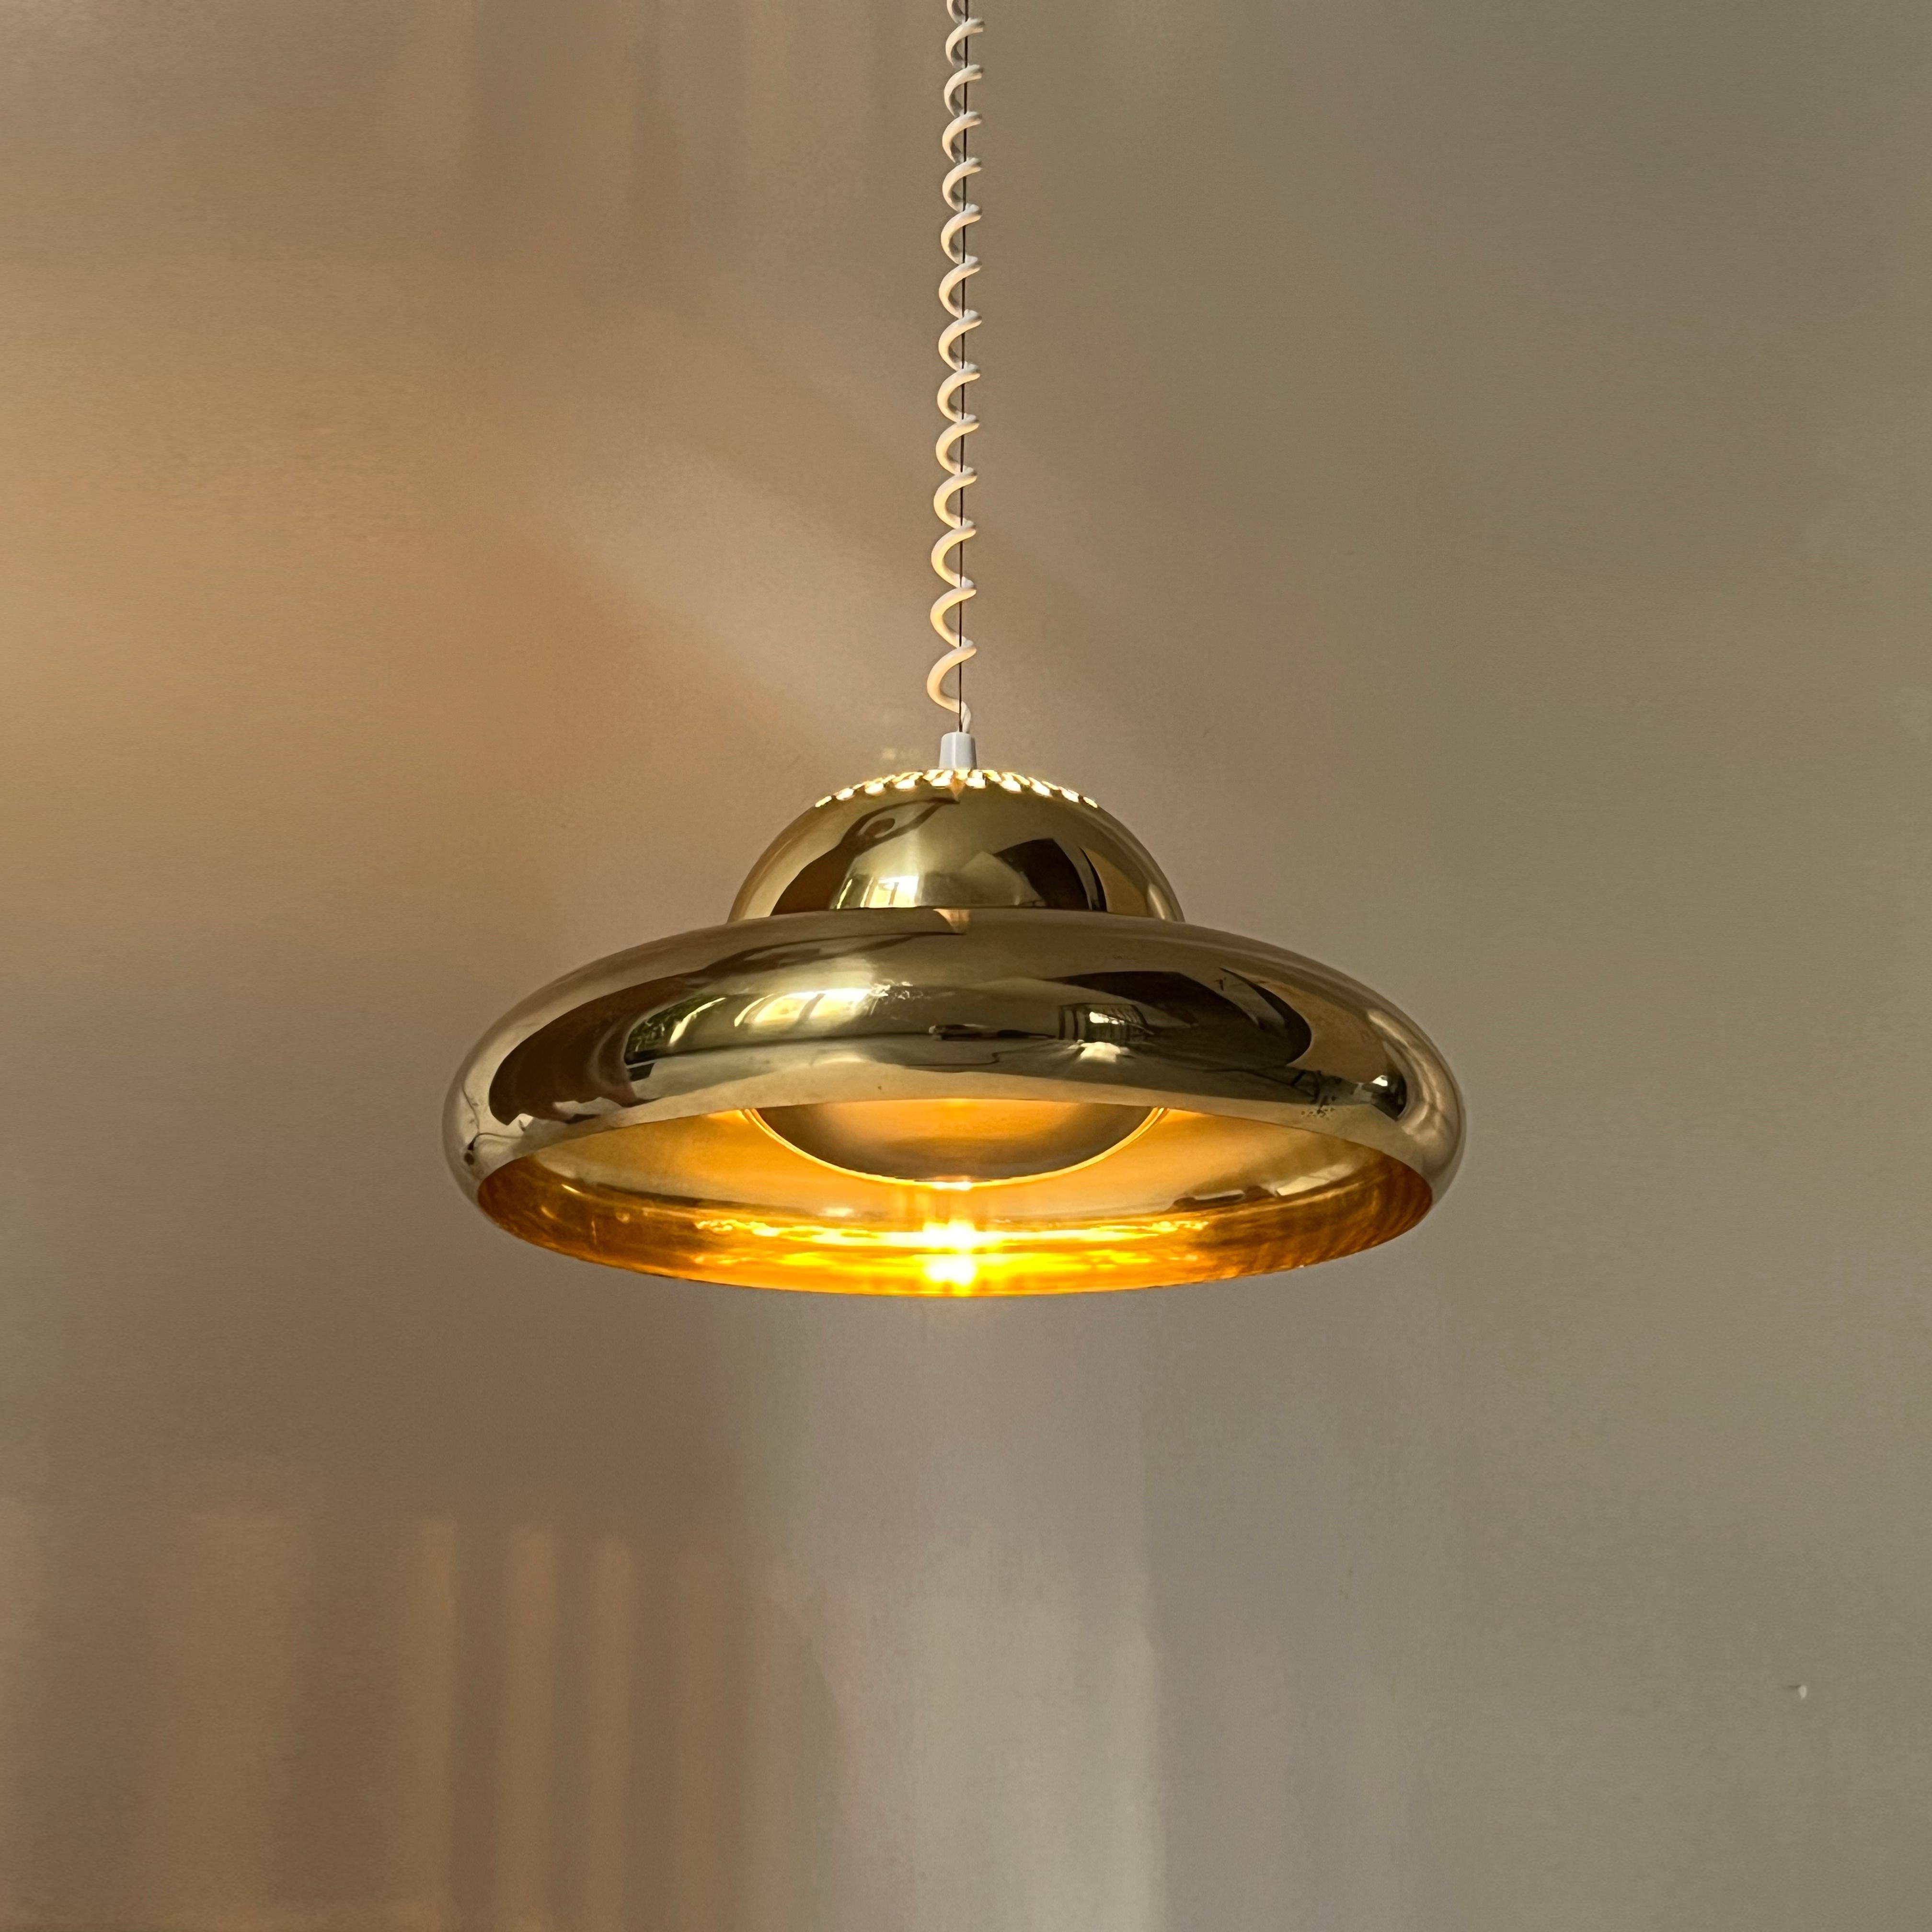 Brass Pendant Fior Di Loto by Afra and Tobia Scarpa for Flos, 1960s For Sale 1